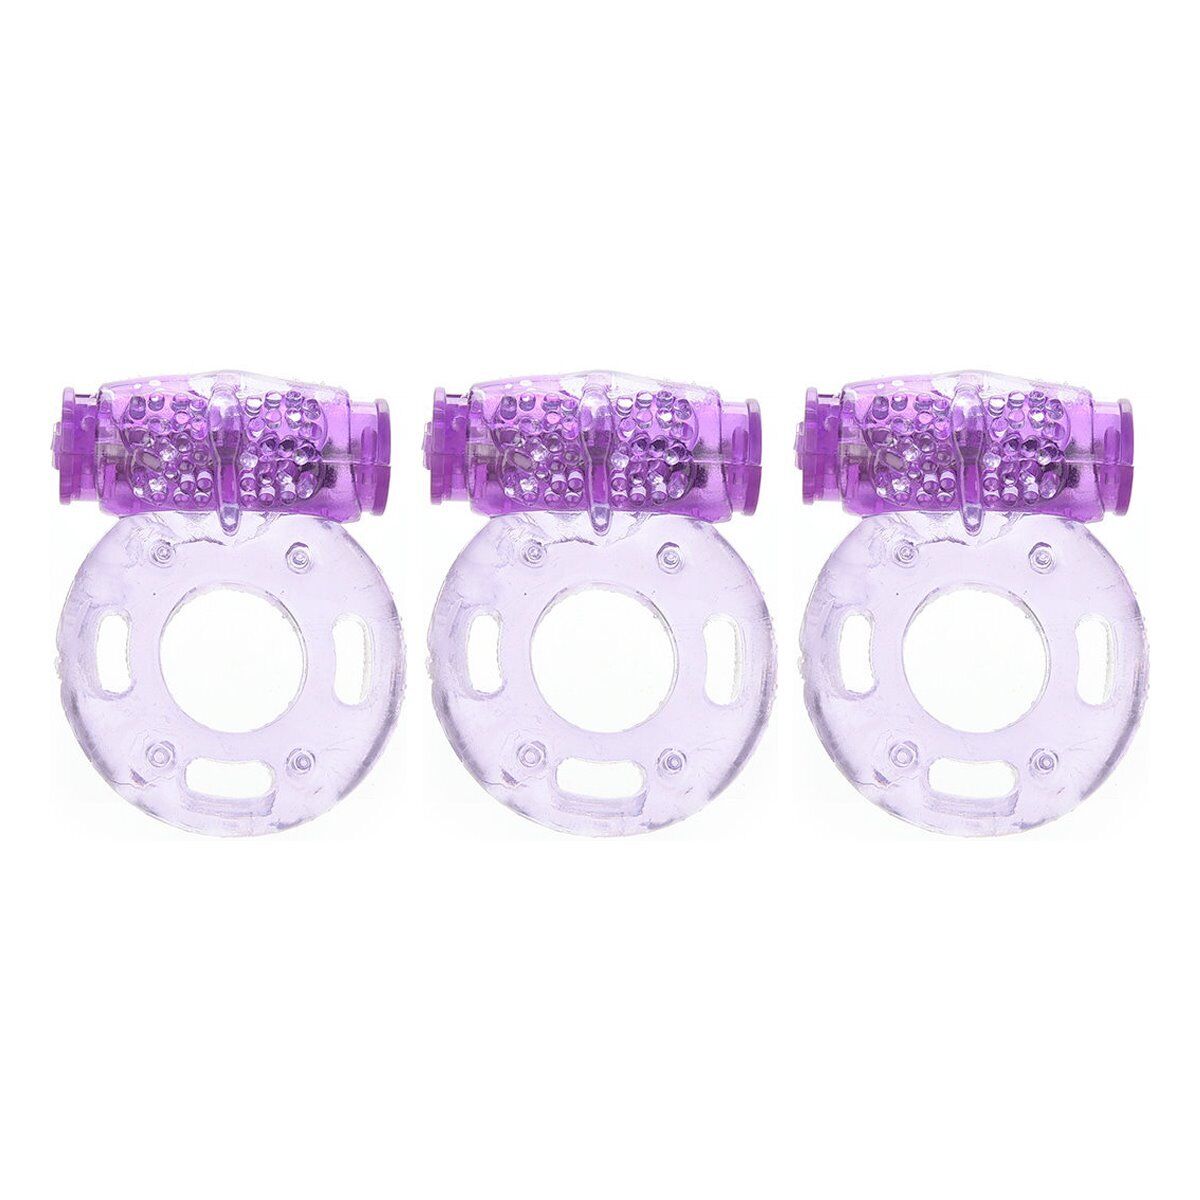 3 Vibrating Penis Cock Ring Male Penis Erection Enhancer Sex-toys for Couples